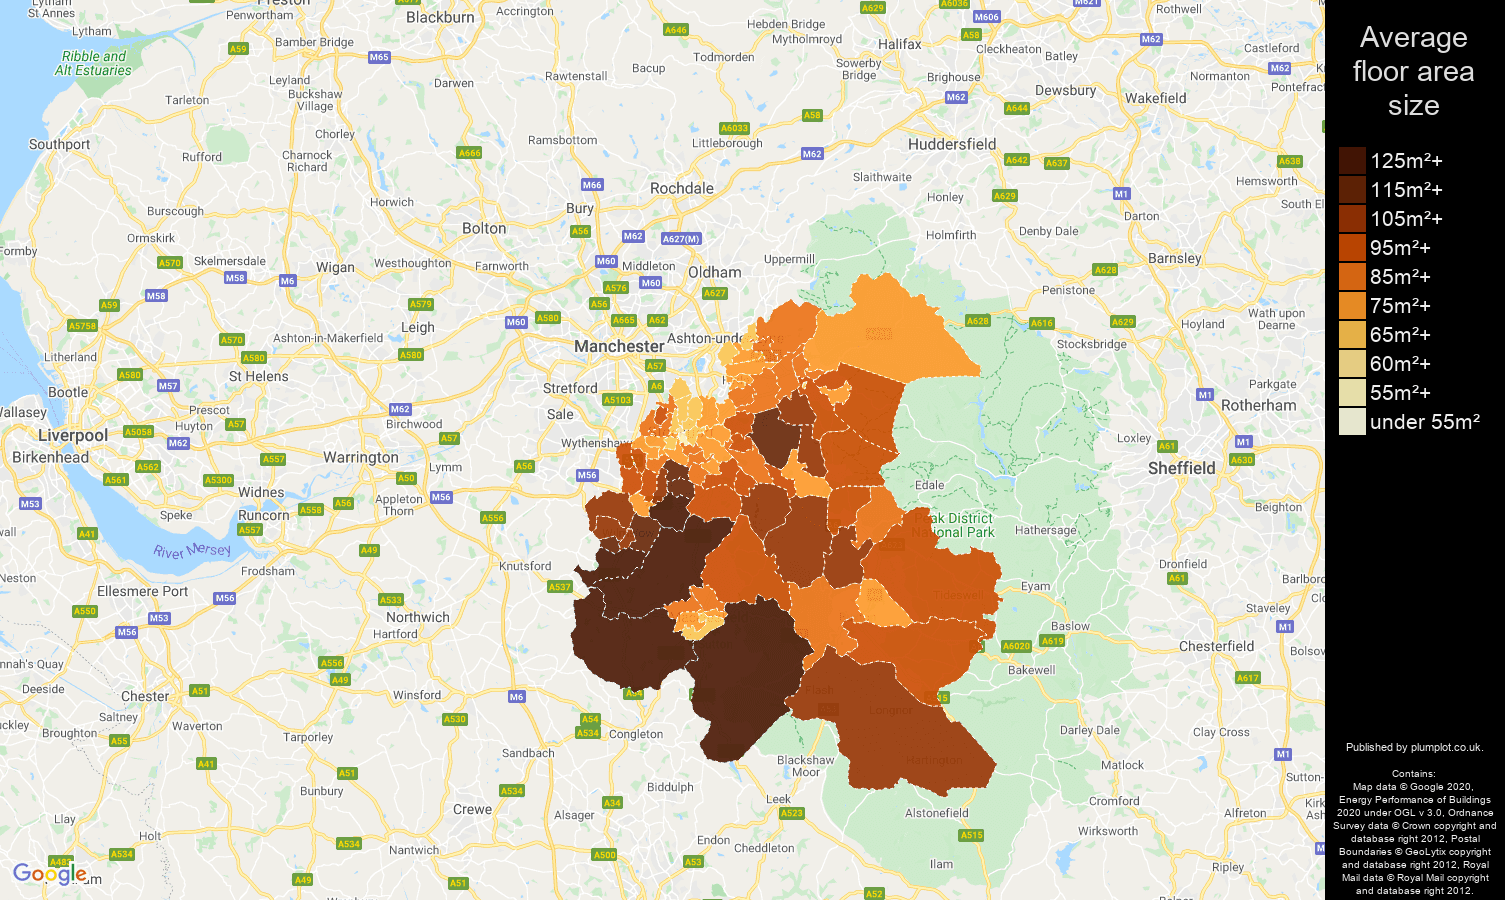 Stockport map of average floor area size of properties